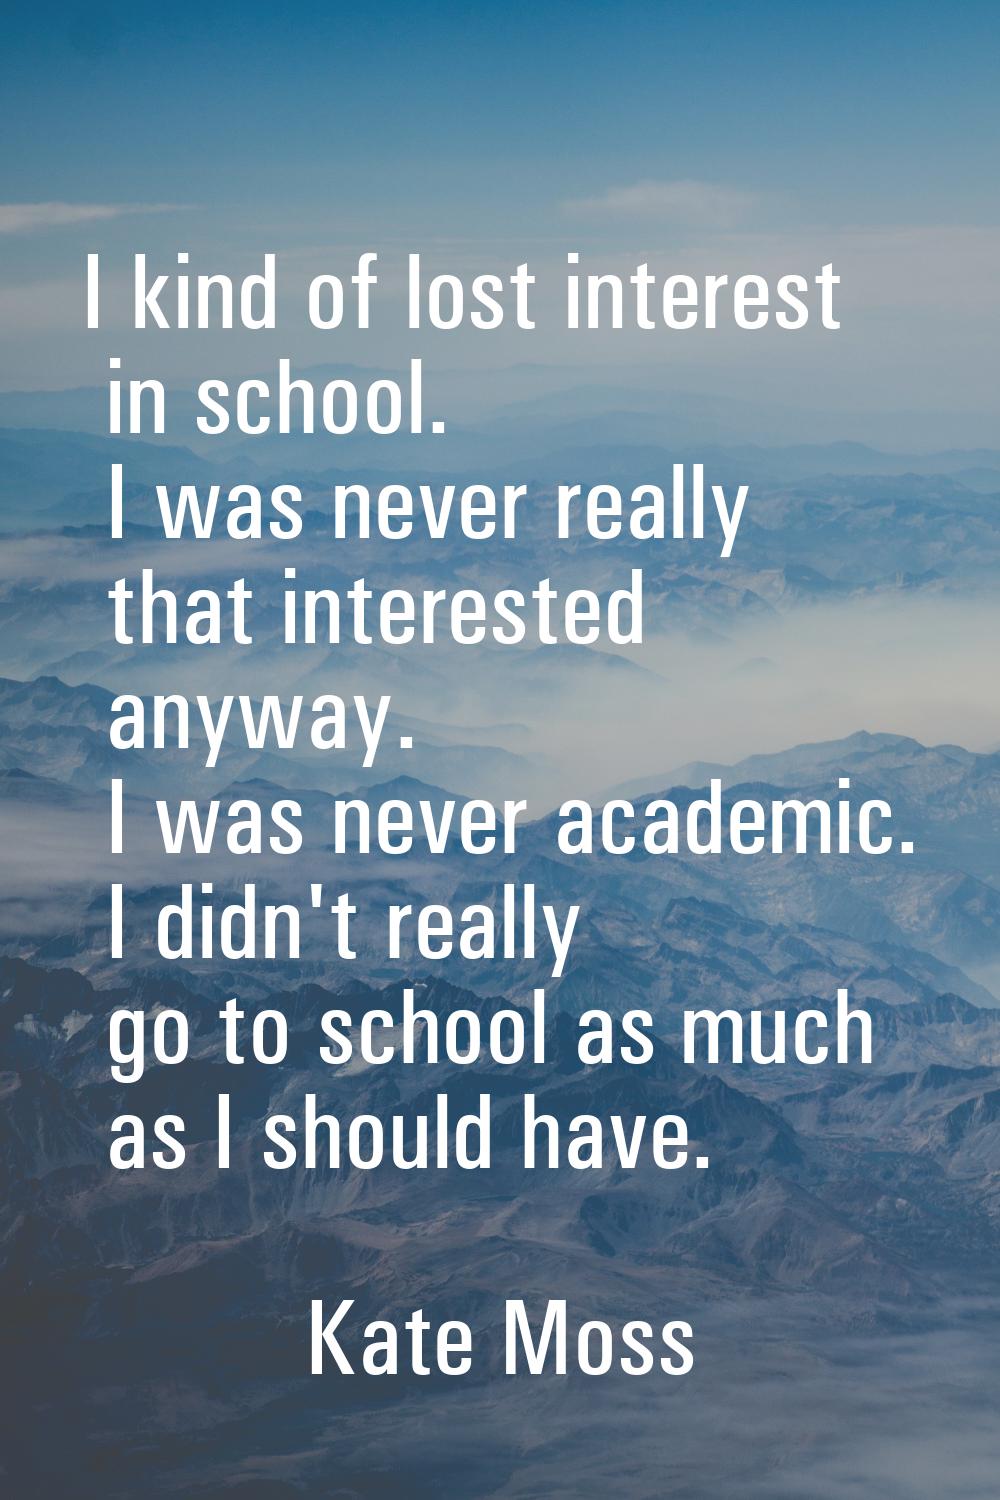 I kind of lost interest in school. I was never really that interested anyway. I was never academic.